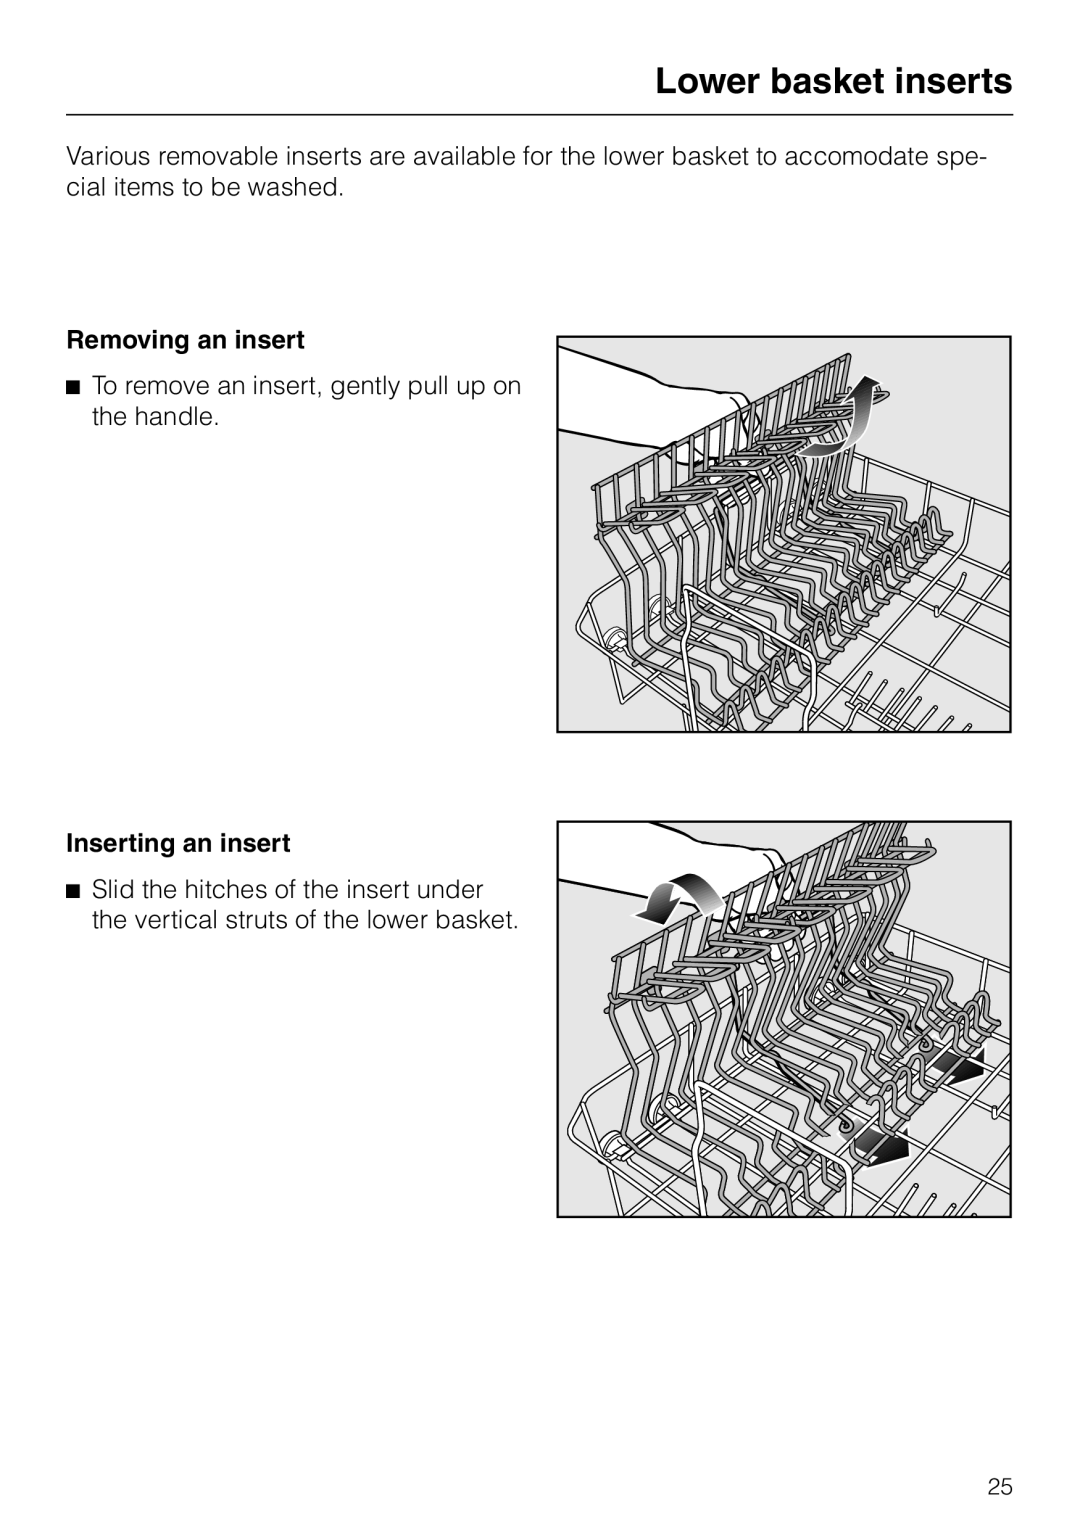 Miele G 663 PLUS, G 863 PLUS operating instructions Lower basket inserts, Removing an insert, Inserting an insert 